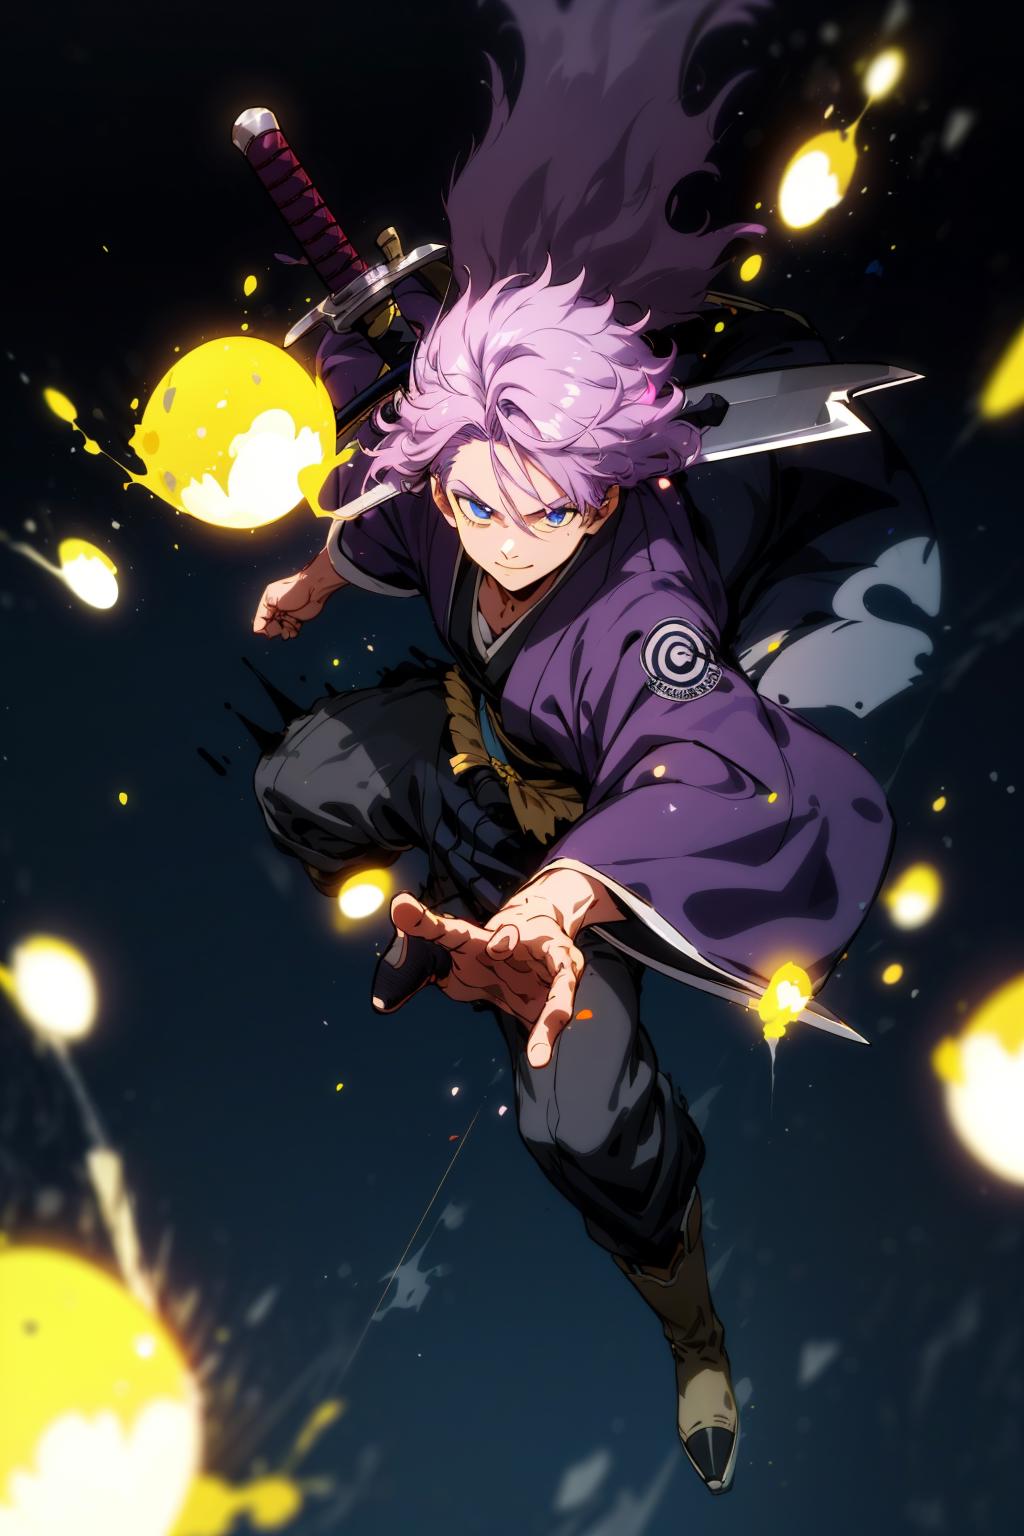 Anime Character with Purple Hair and Blue Eyes, Holding Sword in Hand